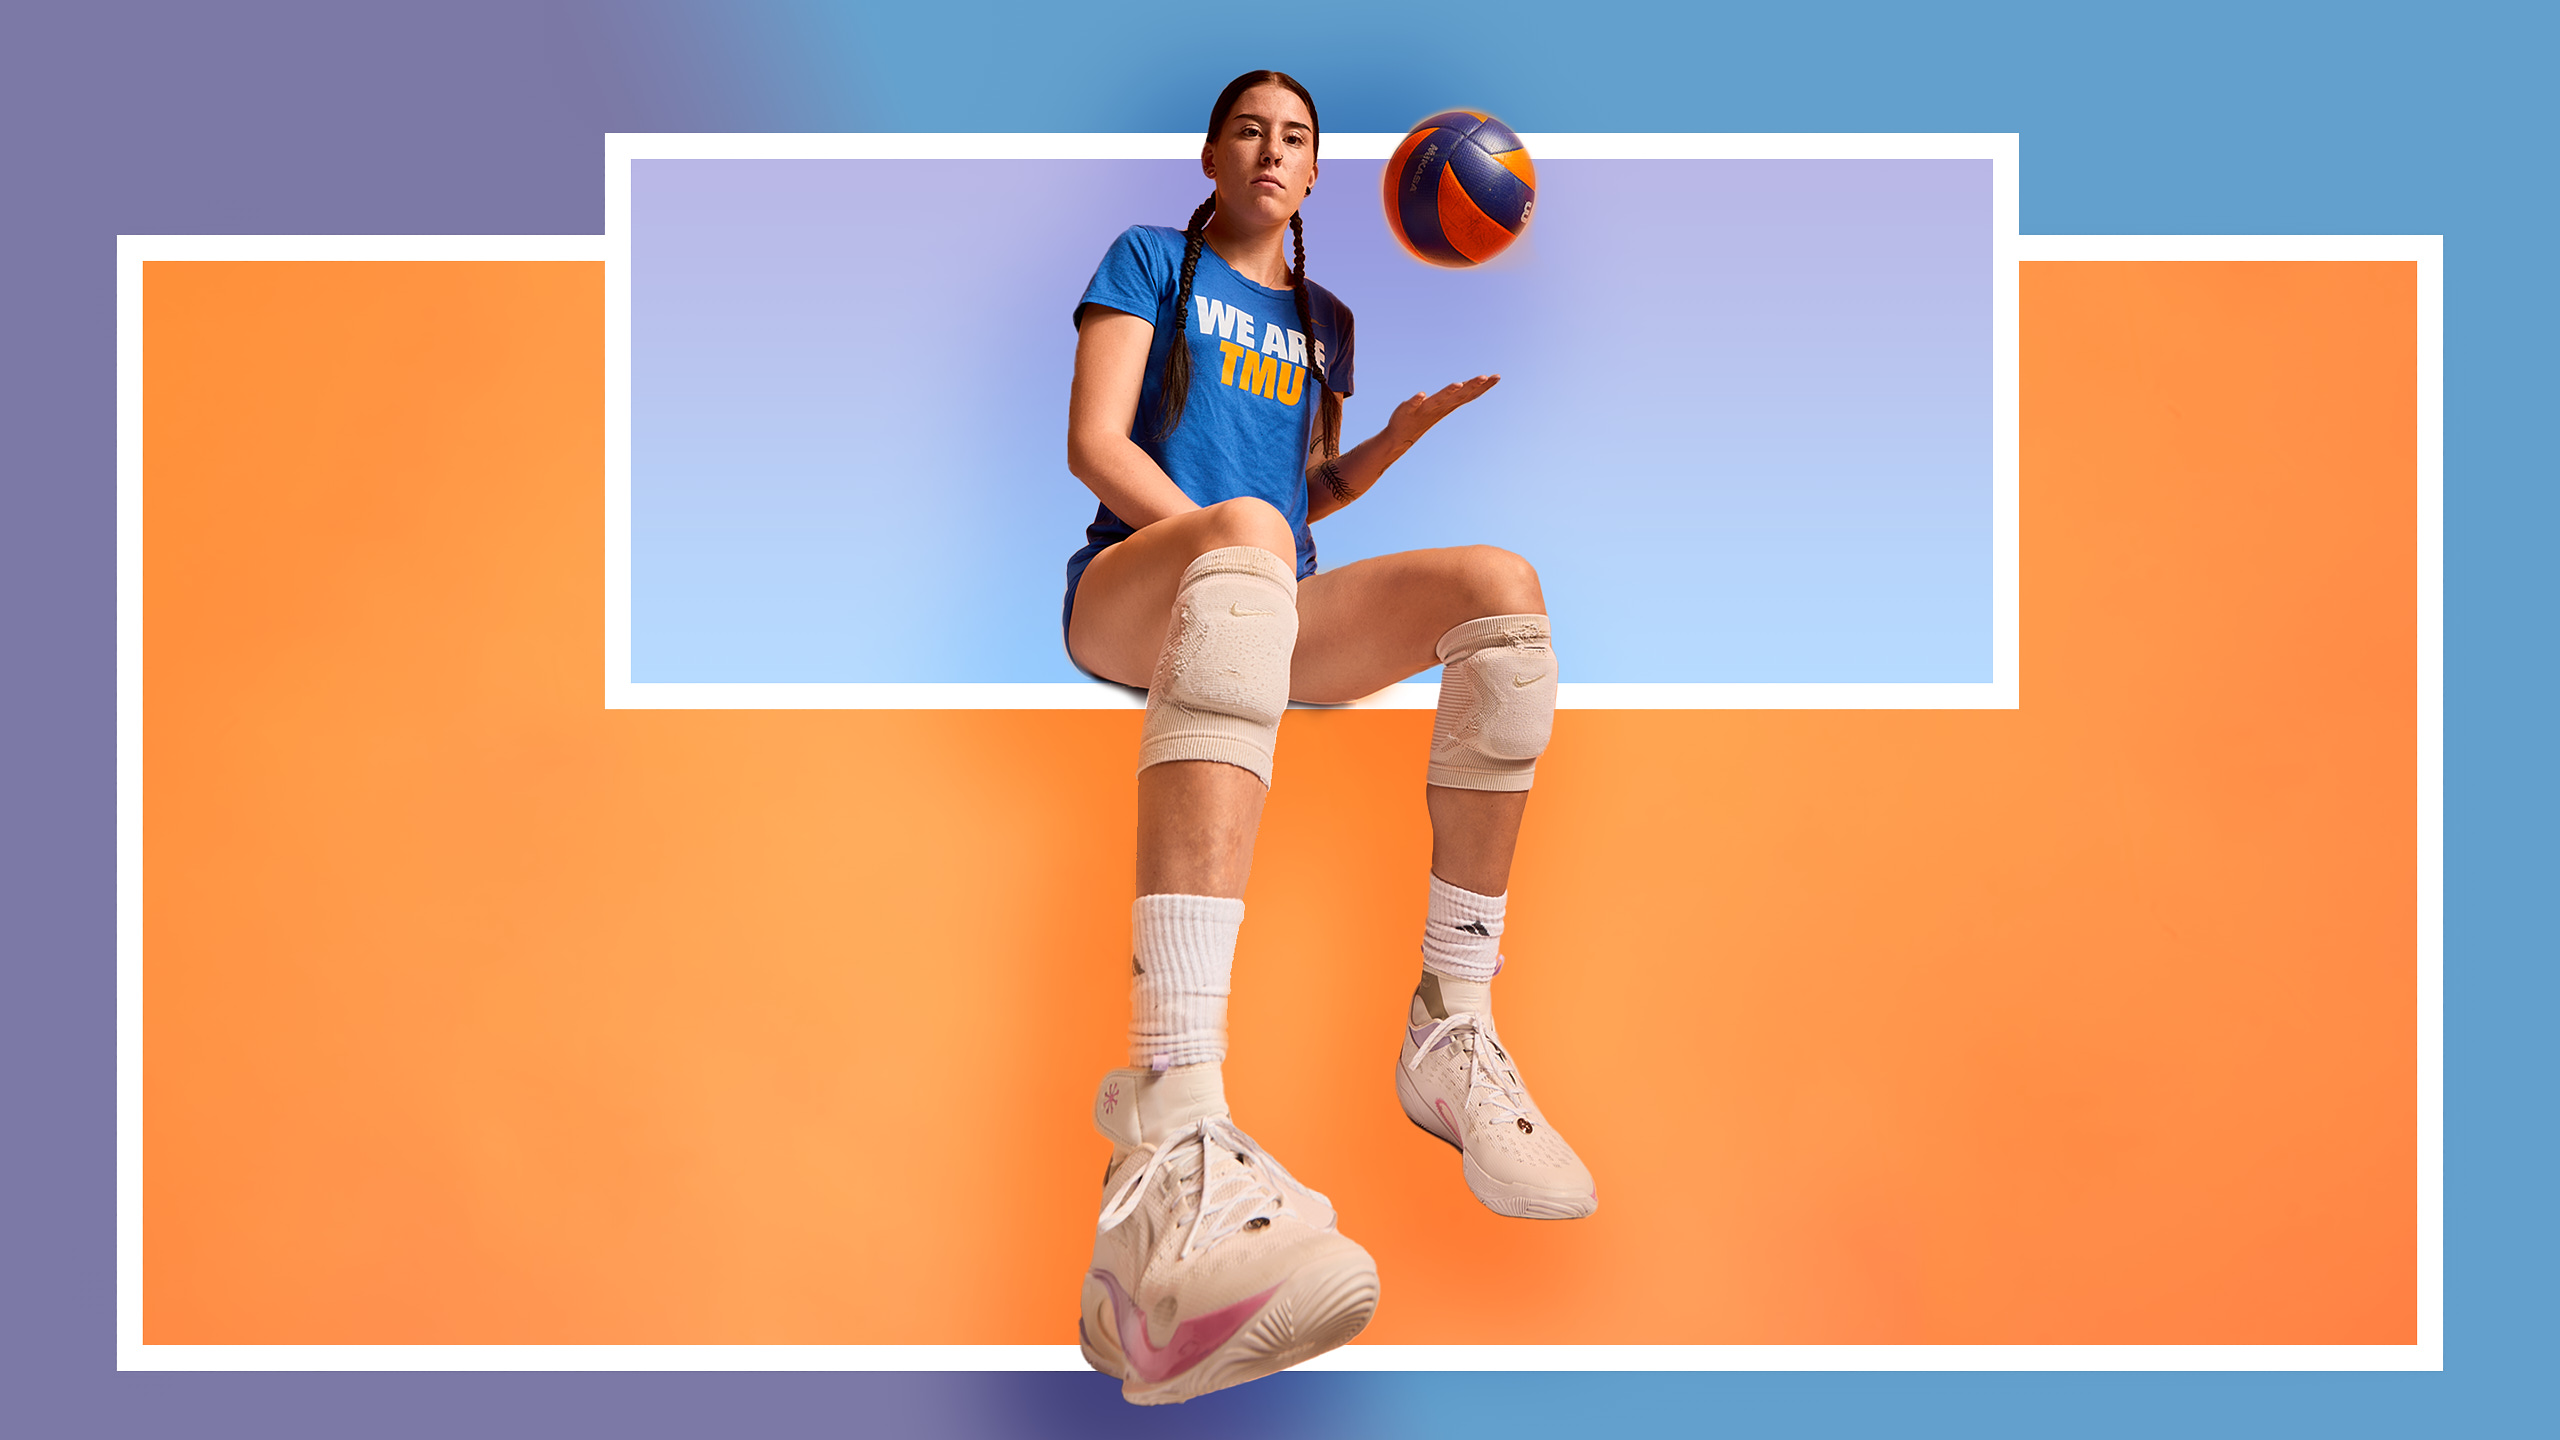 Volleyball player tosses a ball on a colourful background